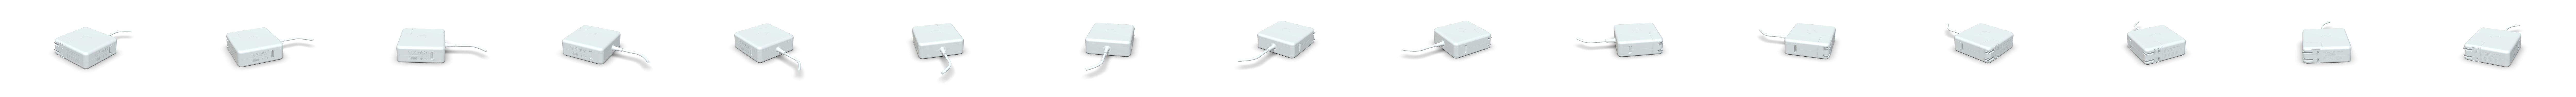 Apple 60W MagSafe 2 Power Adapter 3D model - Download Electronics on